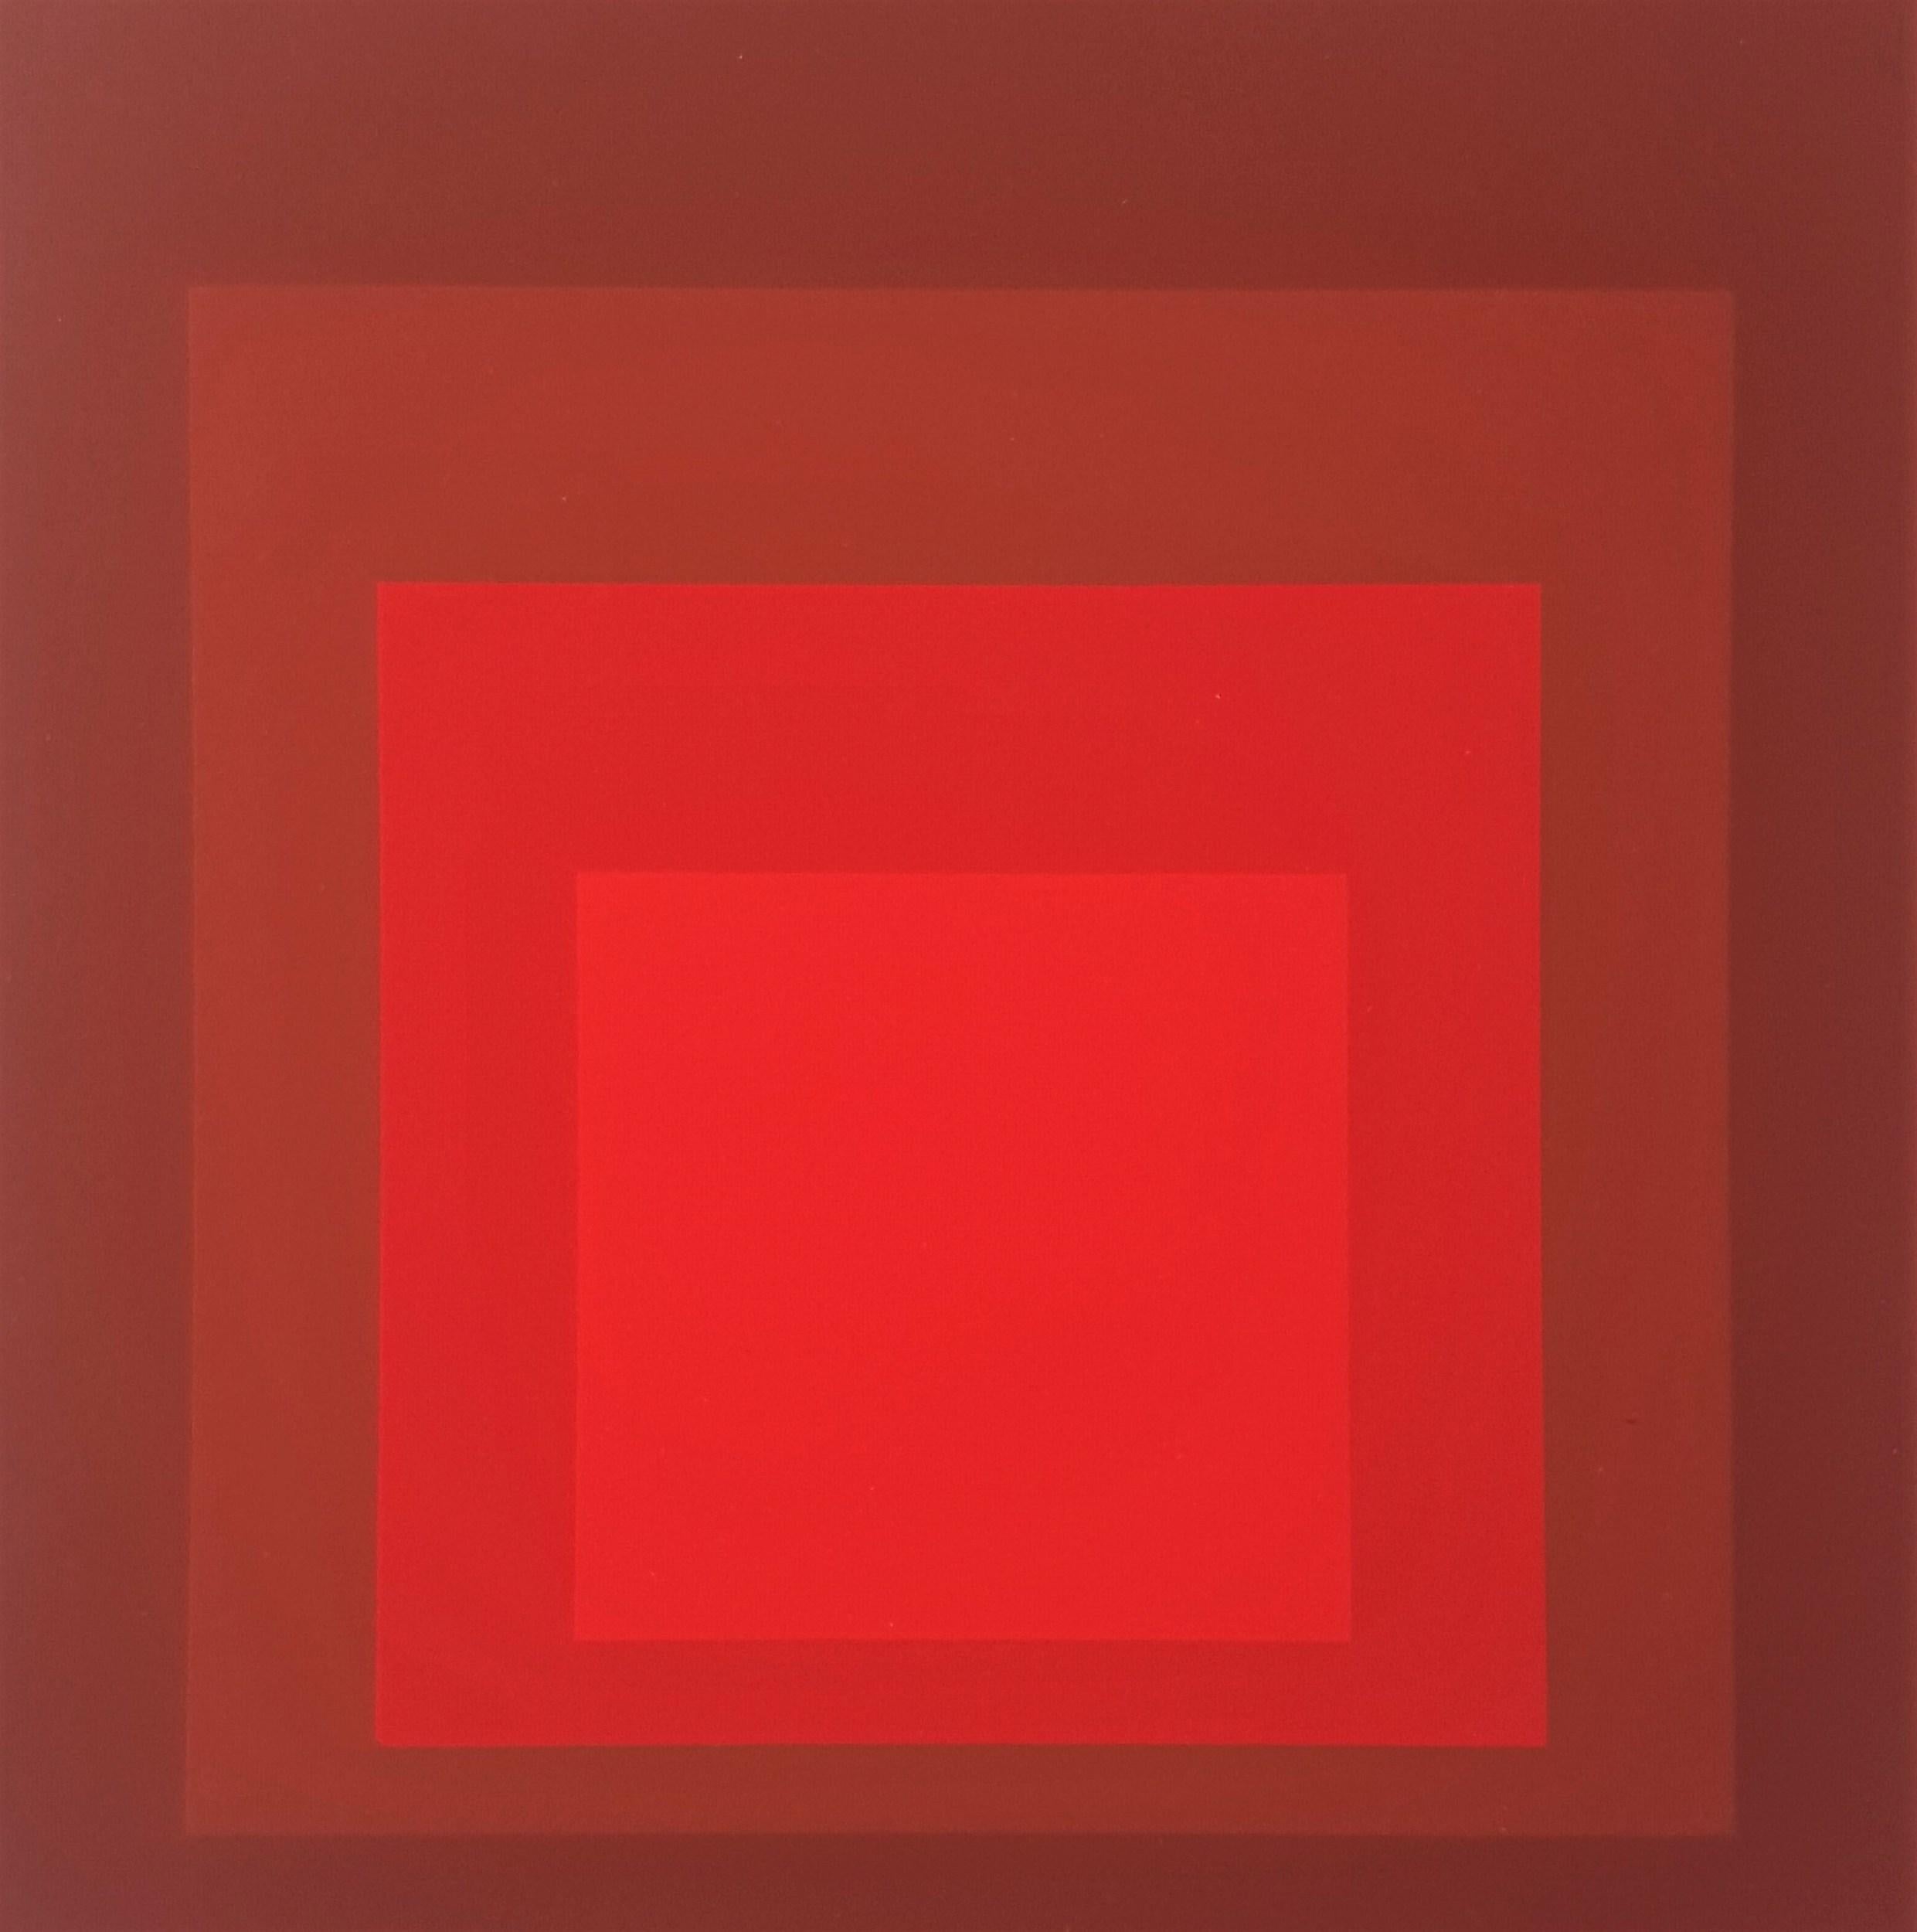 (after) Josef Albers Abstract Print - Homage to the Square: R-I D-5 (~28% OFF LIST PRICE - LIMITED TIME ONLY)